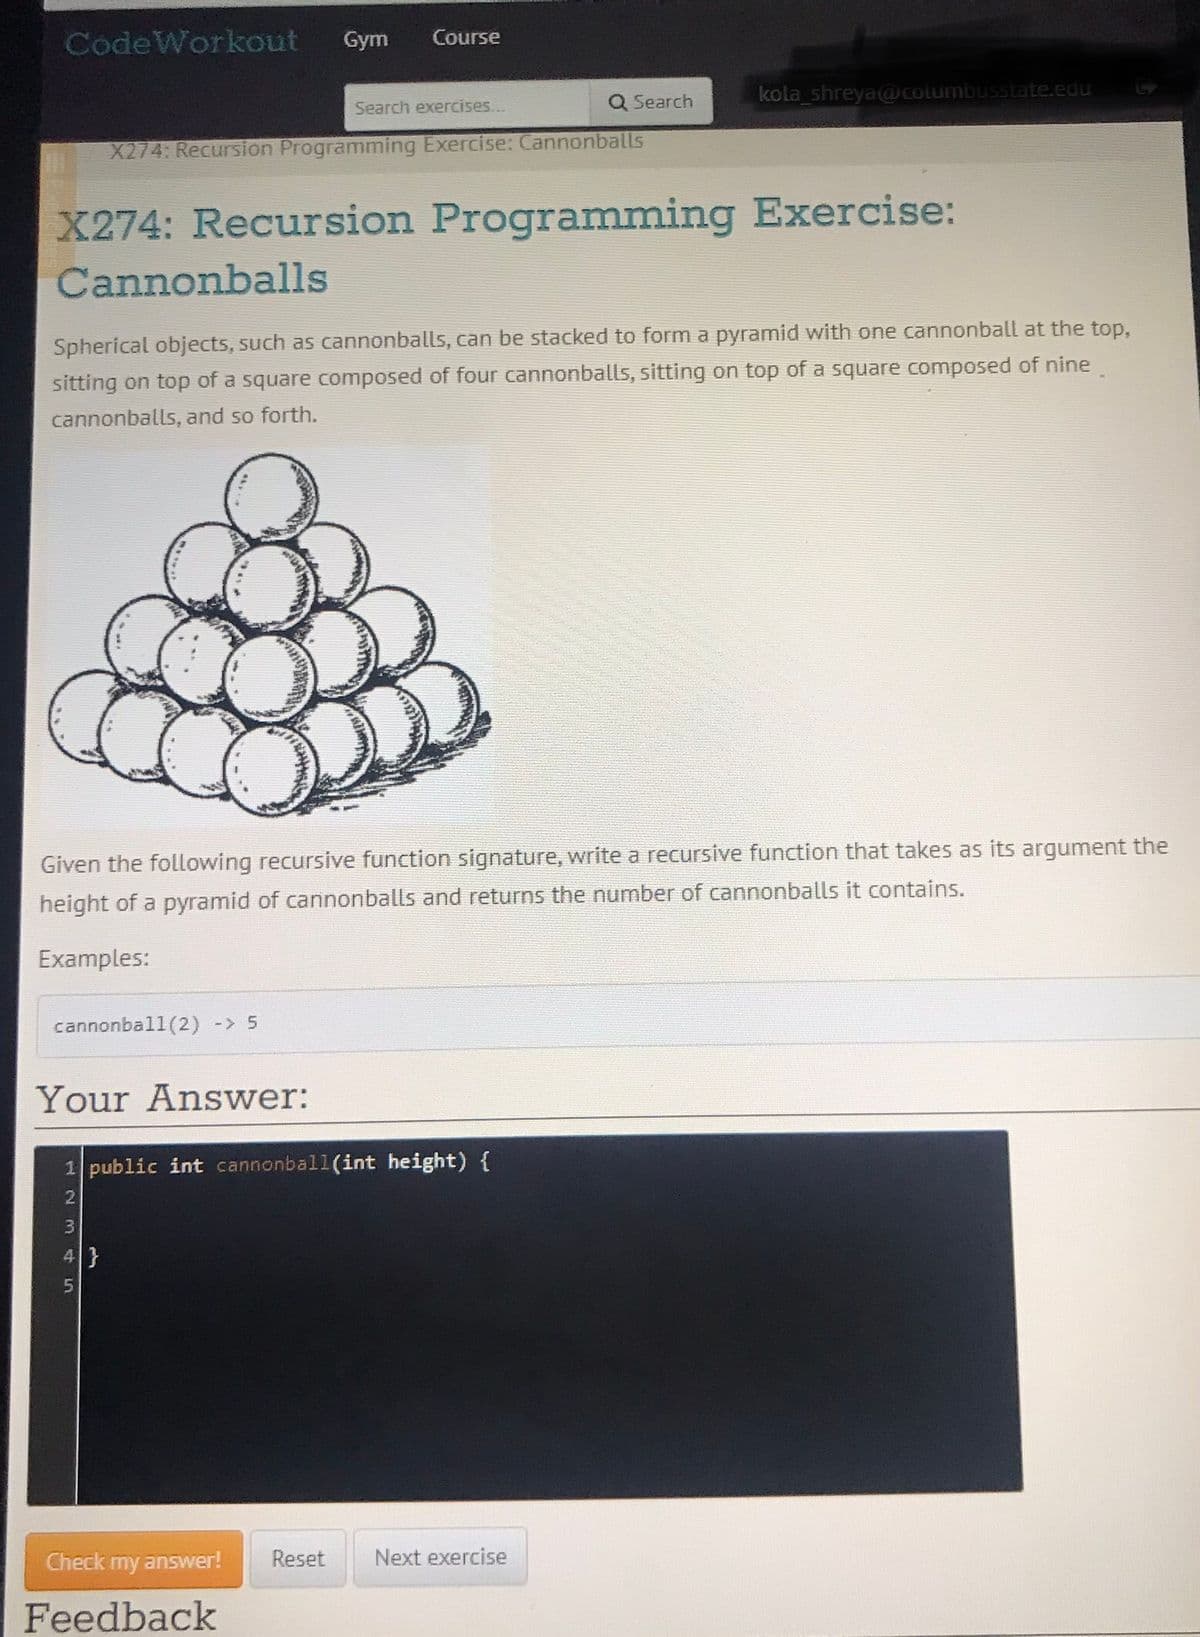 CodeWorkout
Gym
Course
Q Search
kola shreya@ columbusstate.edu
Search exercises...
X274: Recursion Programming Exercise: Cannonballs
X274: Recursion Programming Exercise:
Cannonballs
Spherical objects, such as cannonballs, can be stacked to form a pyramid with one cannonball at the top,
sitting on top of a square composed of four cannonballs, sitting on top of a square composed of nine.
cannonballs, and so forth.
Given the following recursive function signature, write a recursive function that takes as its argument the
height of a pyramid of cannonballs and returns the number of cannonballs it contains.
Examples:
cannonball(2) -> 5
Your Answwer:
1 public int cannonball(int height) {
3.
4}
Check my answer!
Reset
Next exercise
Feedback
